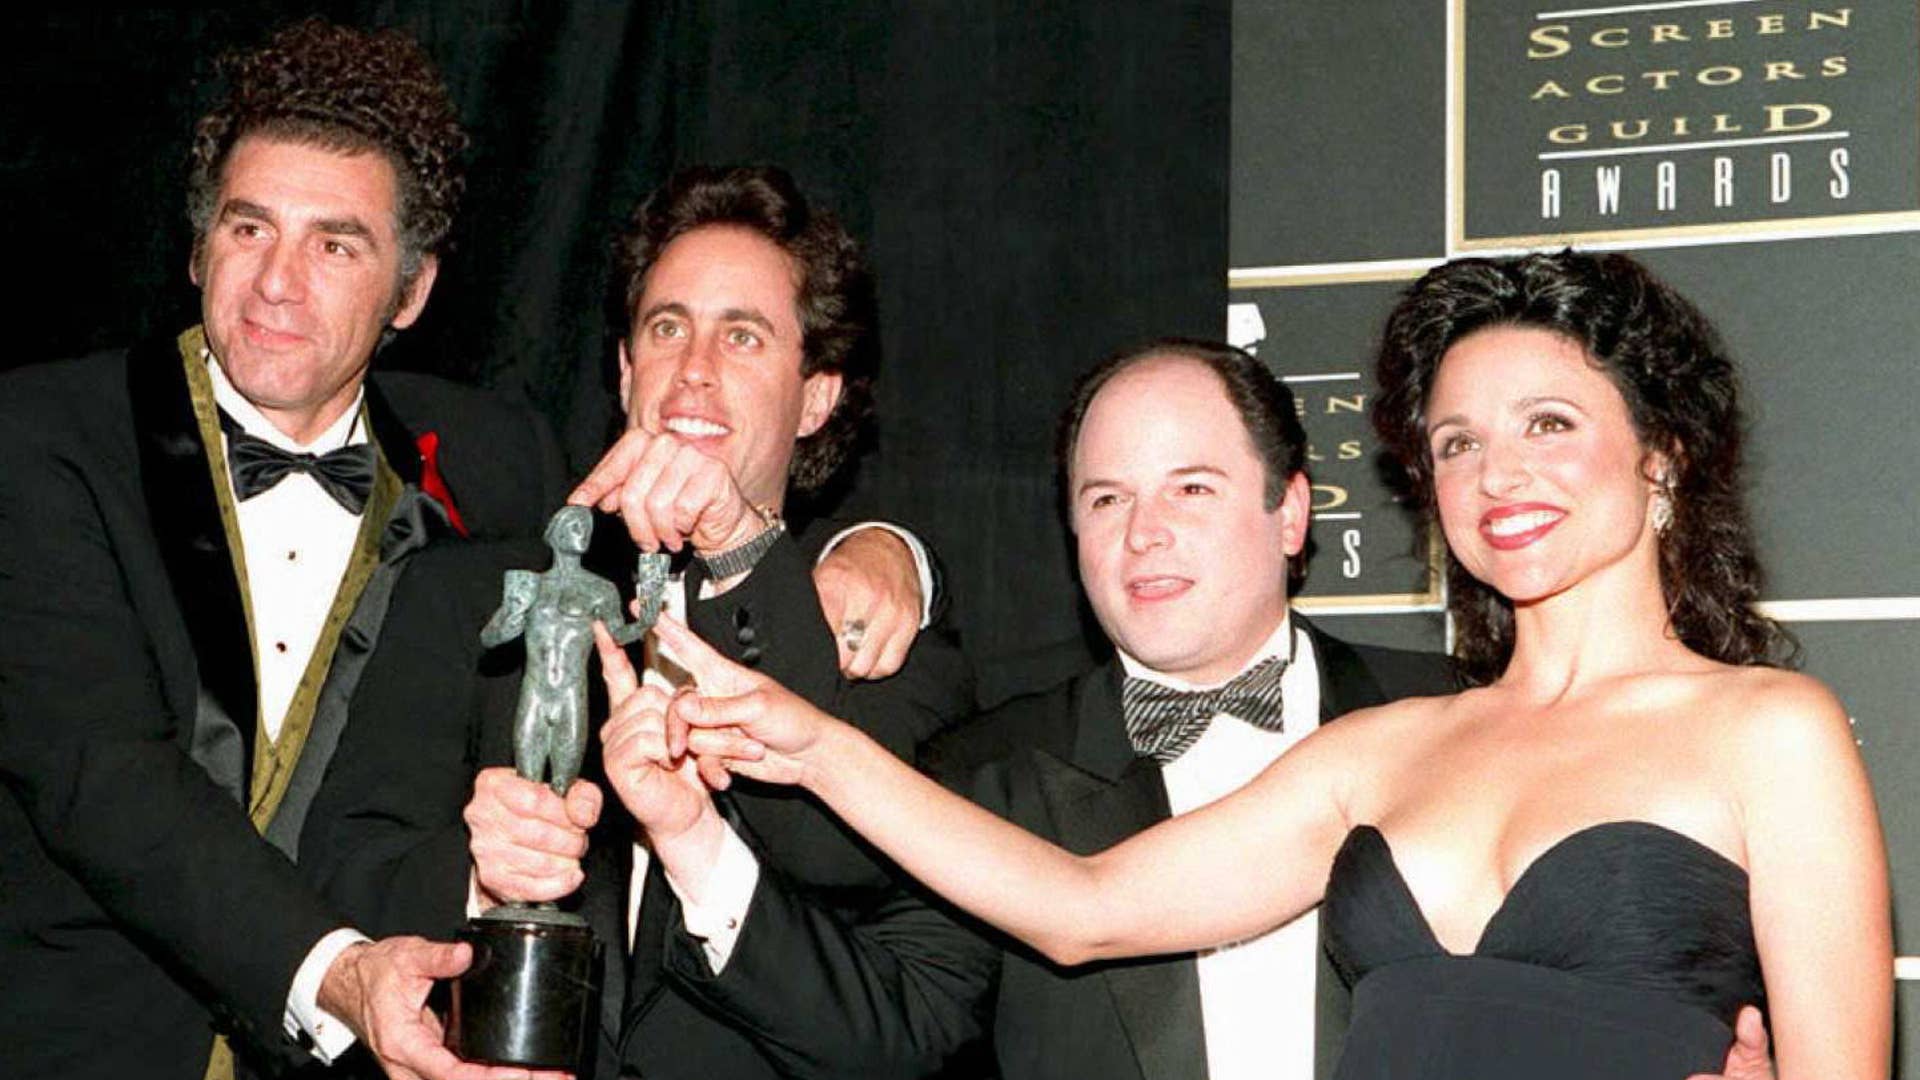 The cast of "Seinfeld" plays with Screen Actors Guild award.